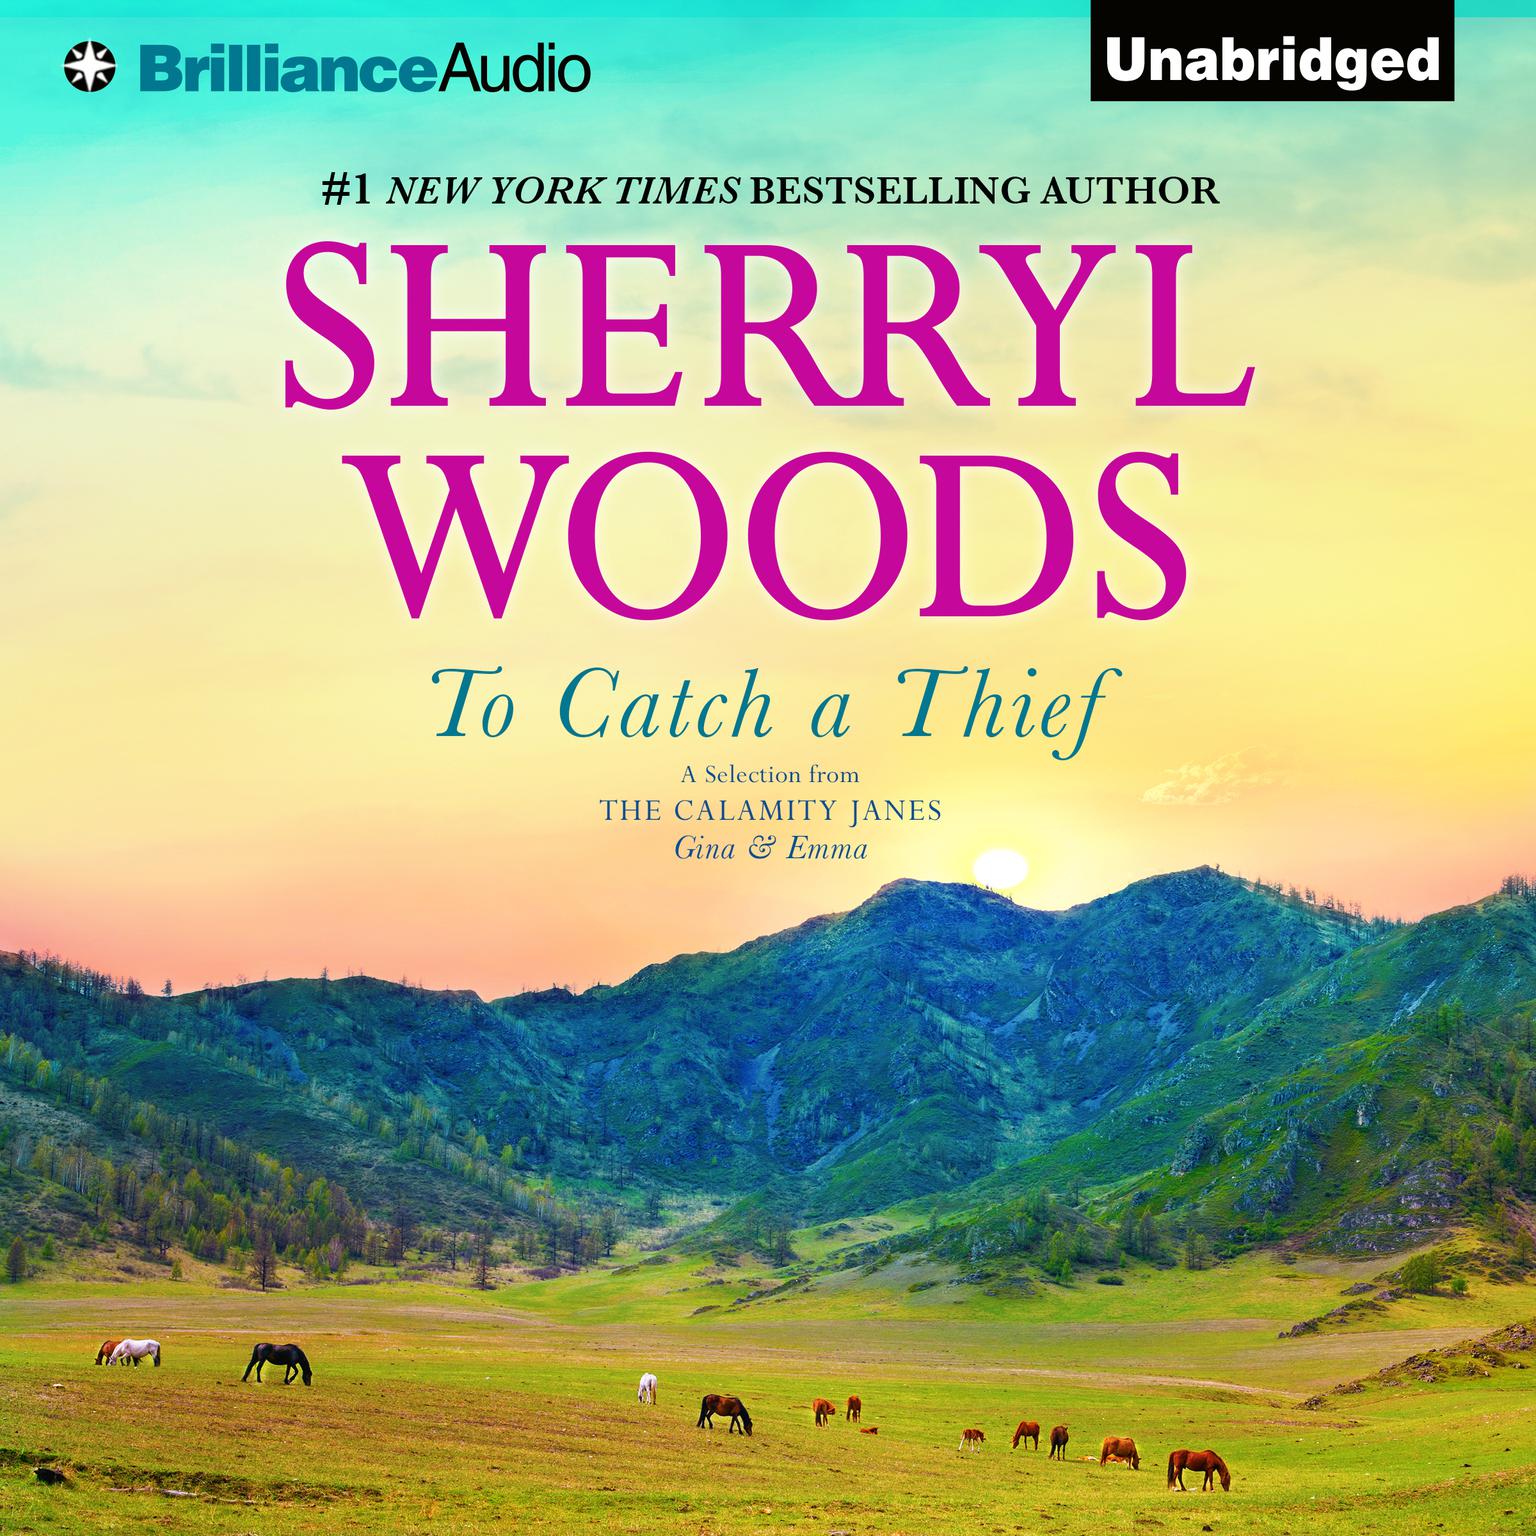 To Catch a Thief: A Selection from The Calamity Janes: Gina & Emma Audiobook, by Sherryl Woods